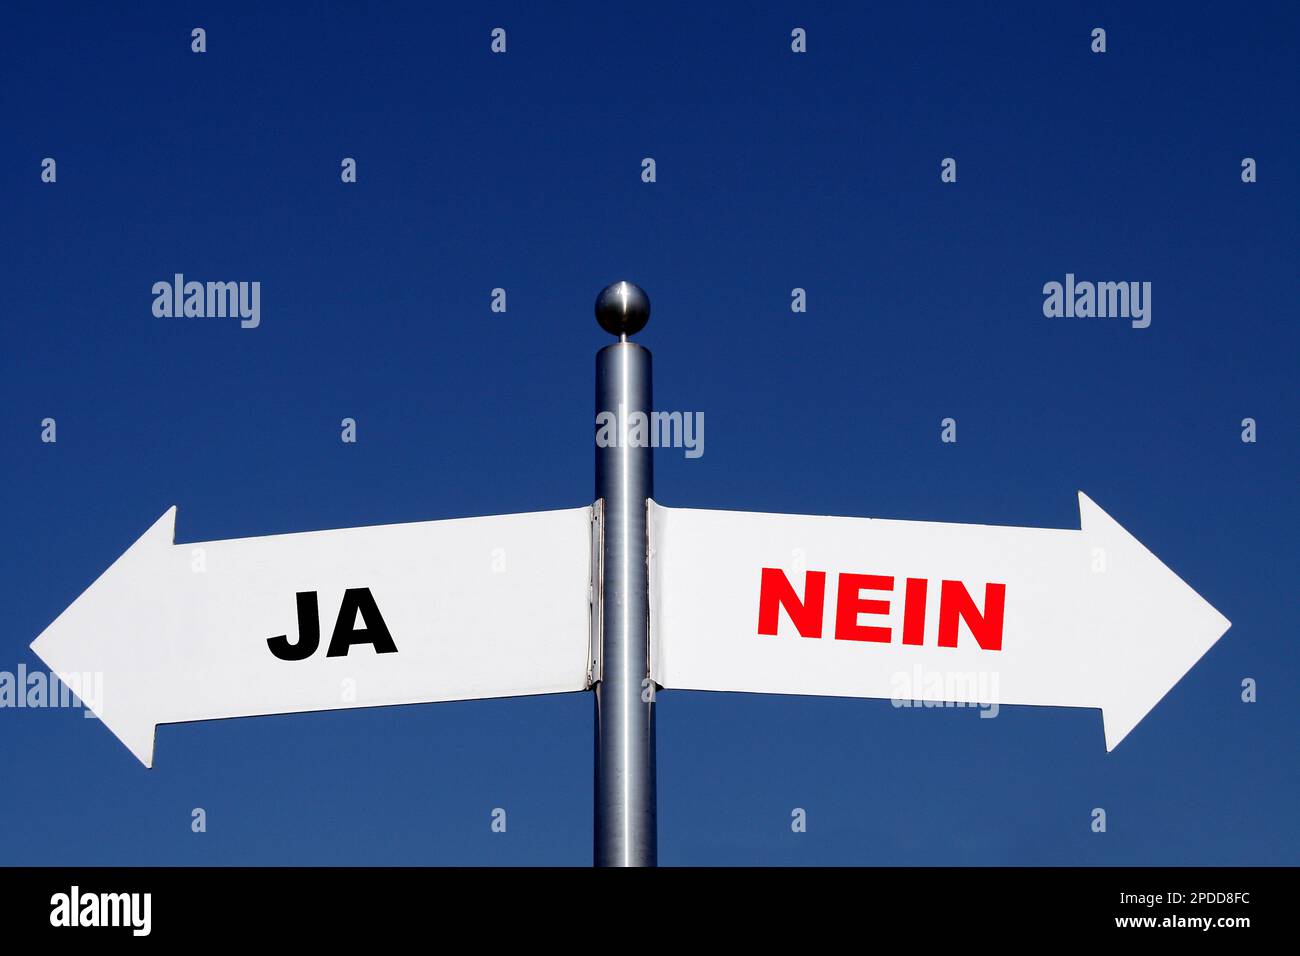 signposts pointing in different directions, options ja - nein, yes - no Stock Photo